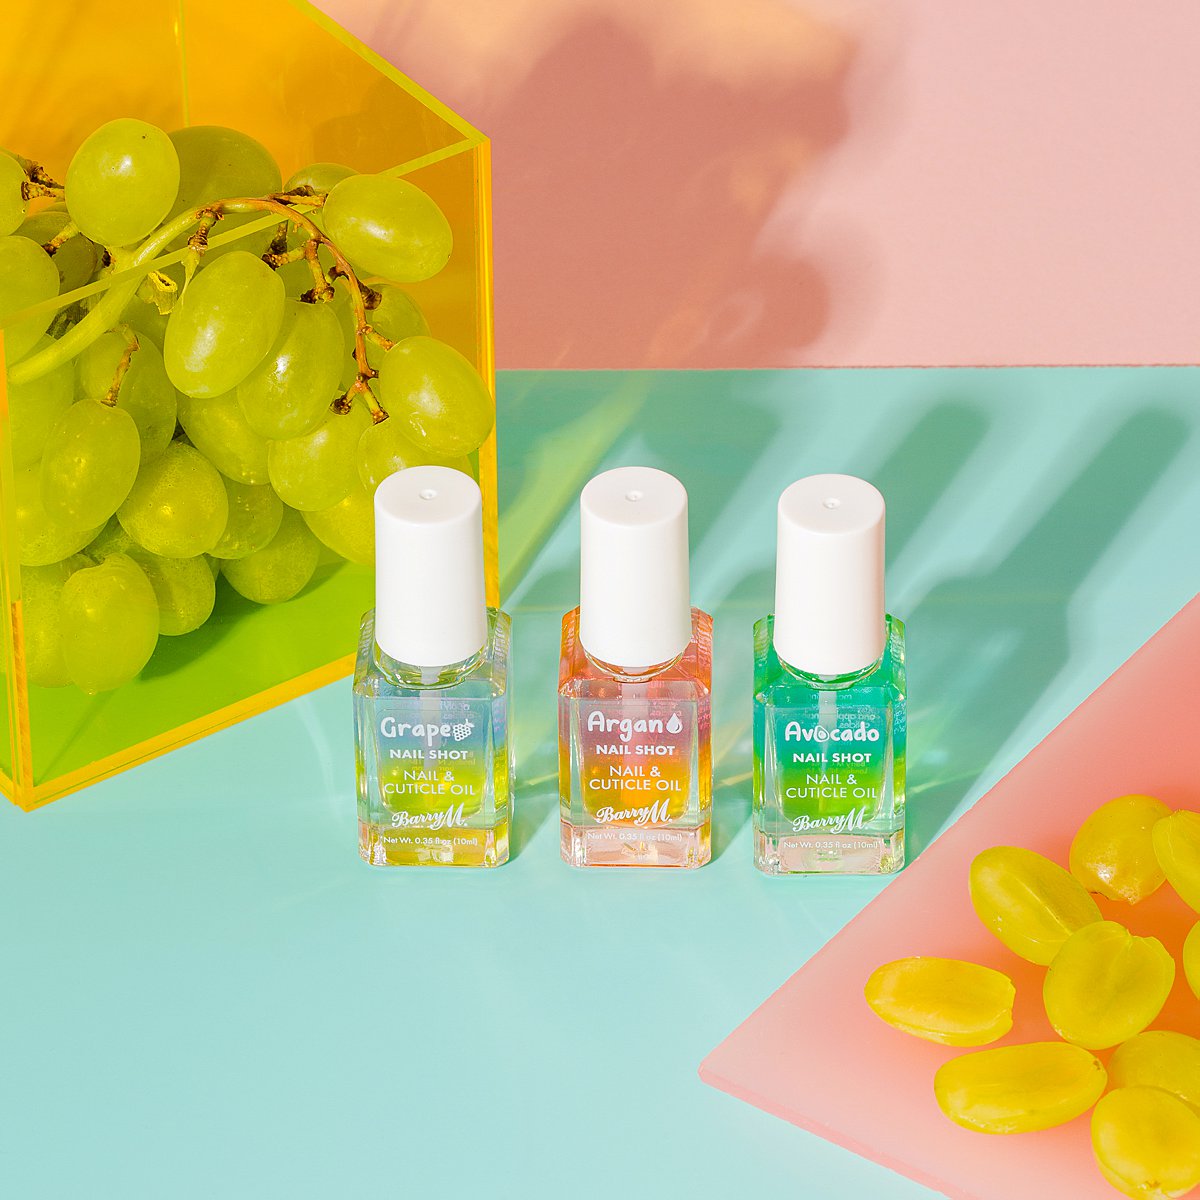 Colourful content creation for Barry M cosmetics. Styled stills product photography by Marianne Taylor.